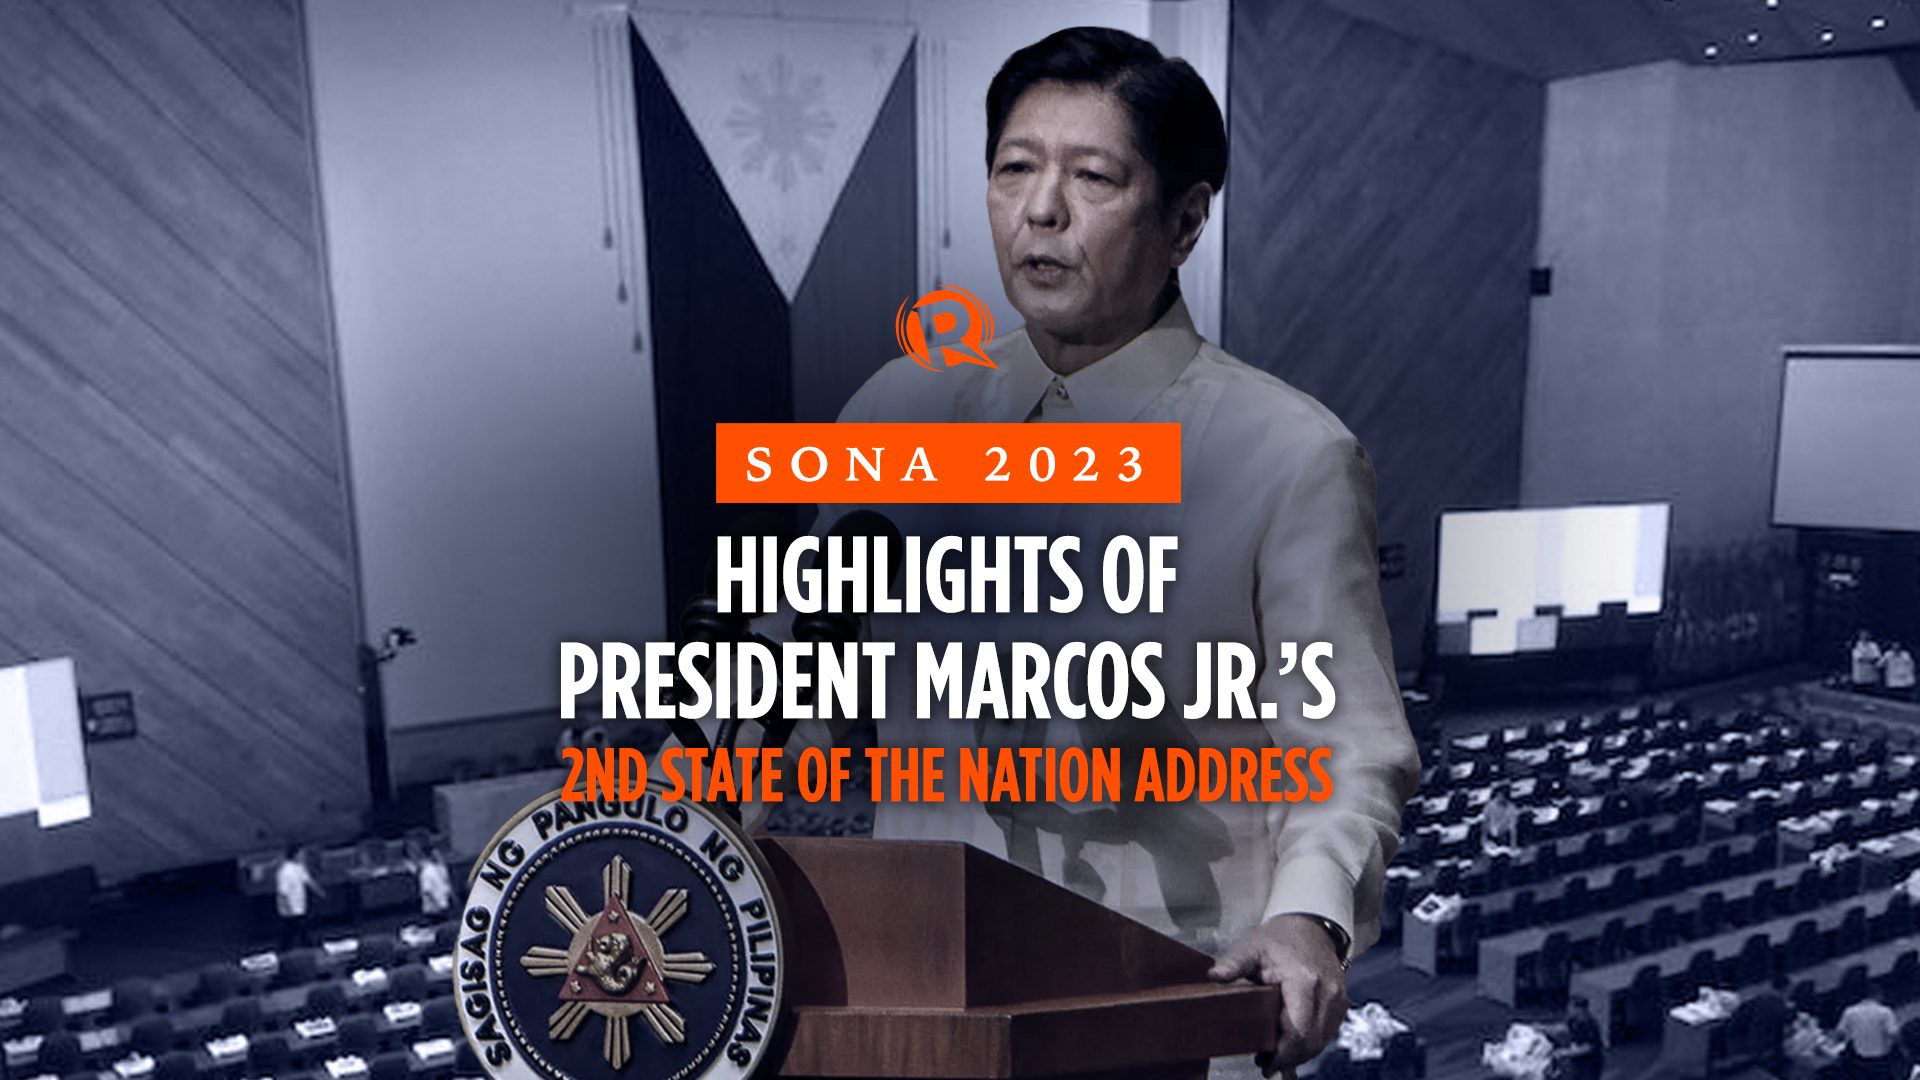 SONA 2023 HIGHLIGHTS: Summary of Marcos’ 2nd State of the Nation Address